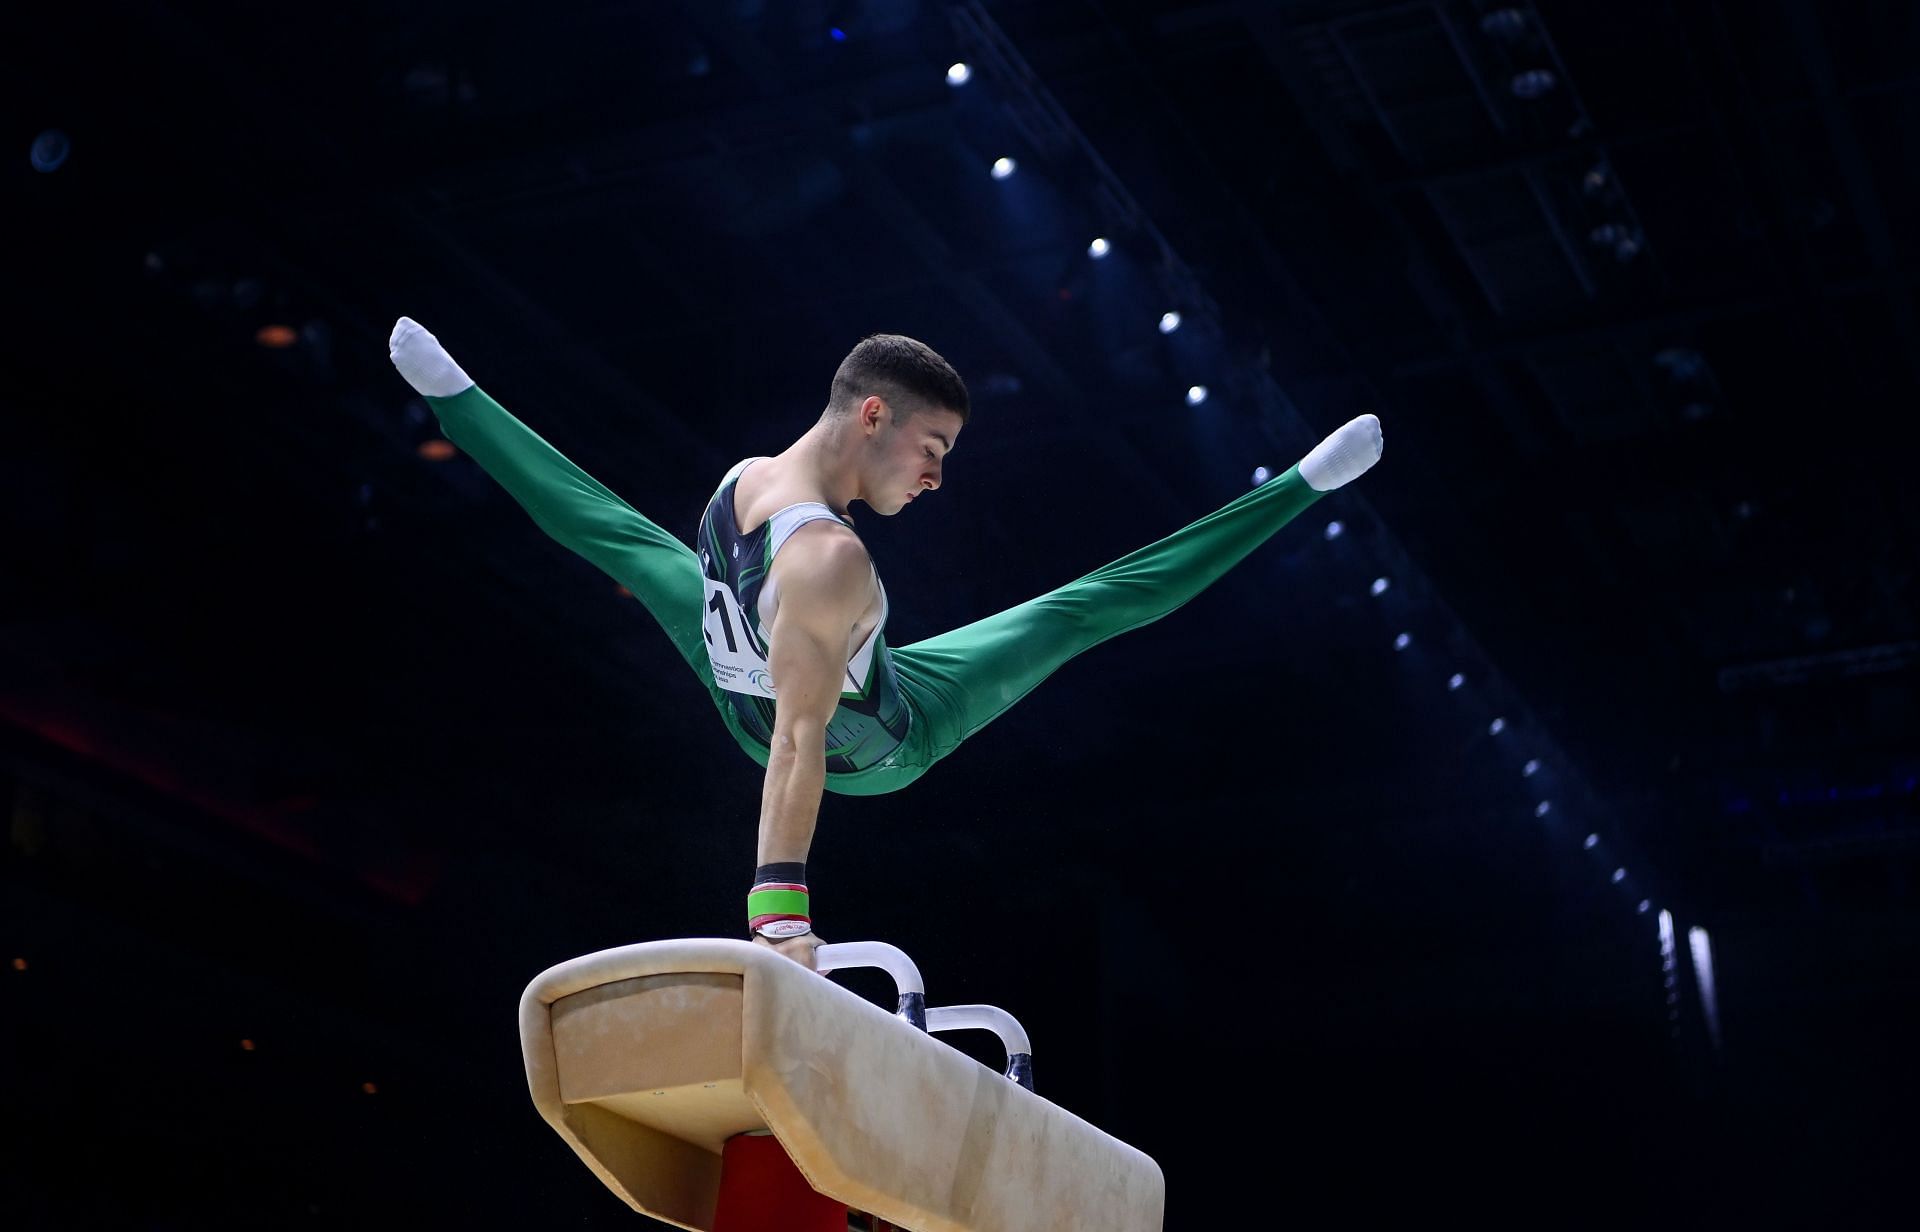 2022 Gymnastics World Championships - Day Eight (Image via Laurence Griffiths/Getty Images)